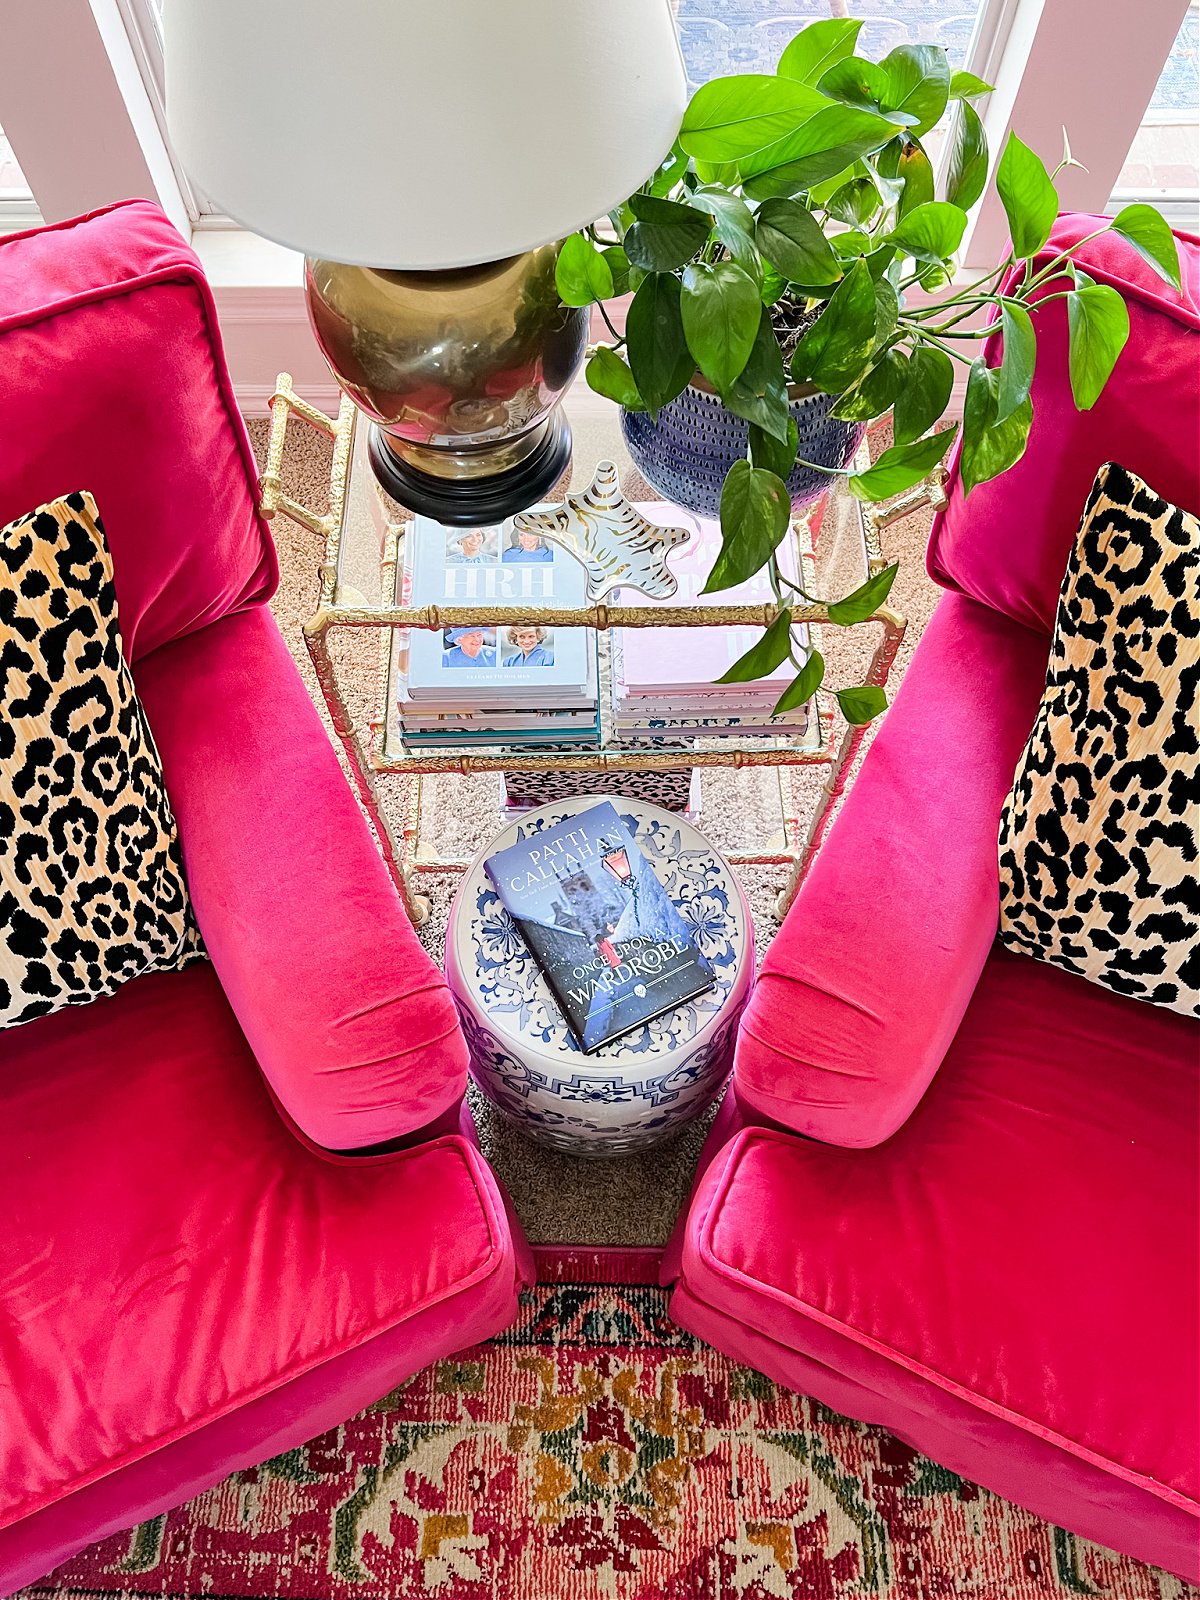 pink club chairs with books on end table- Once Upon A Wardrobe book